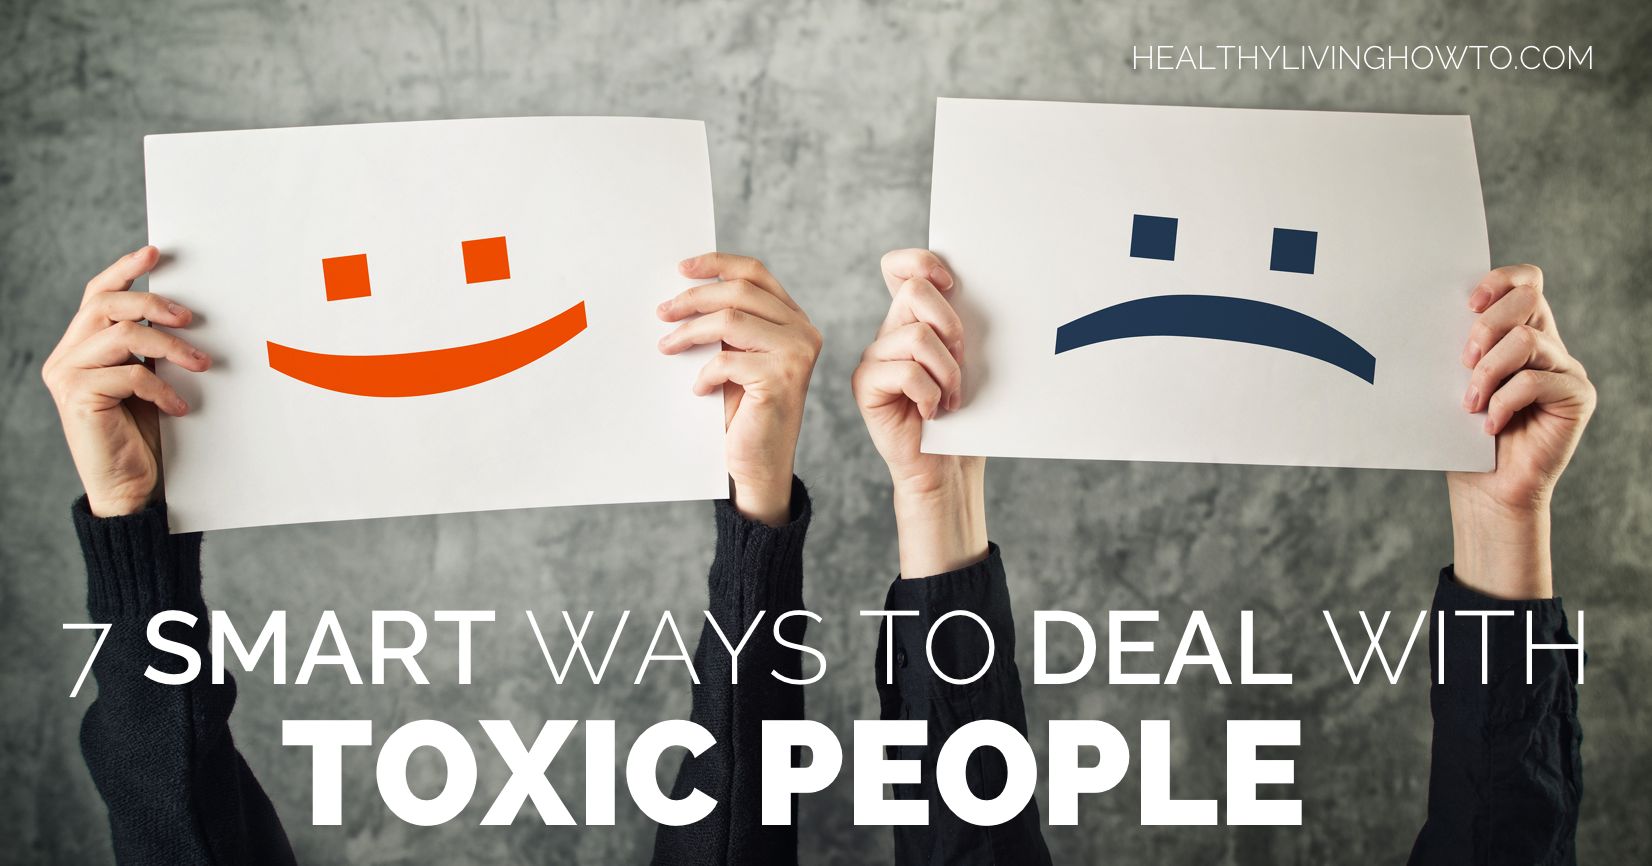 7 Smart Ways To Deal With Toxic People | healthylivinghowto.com